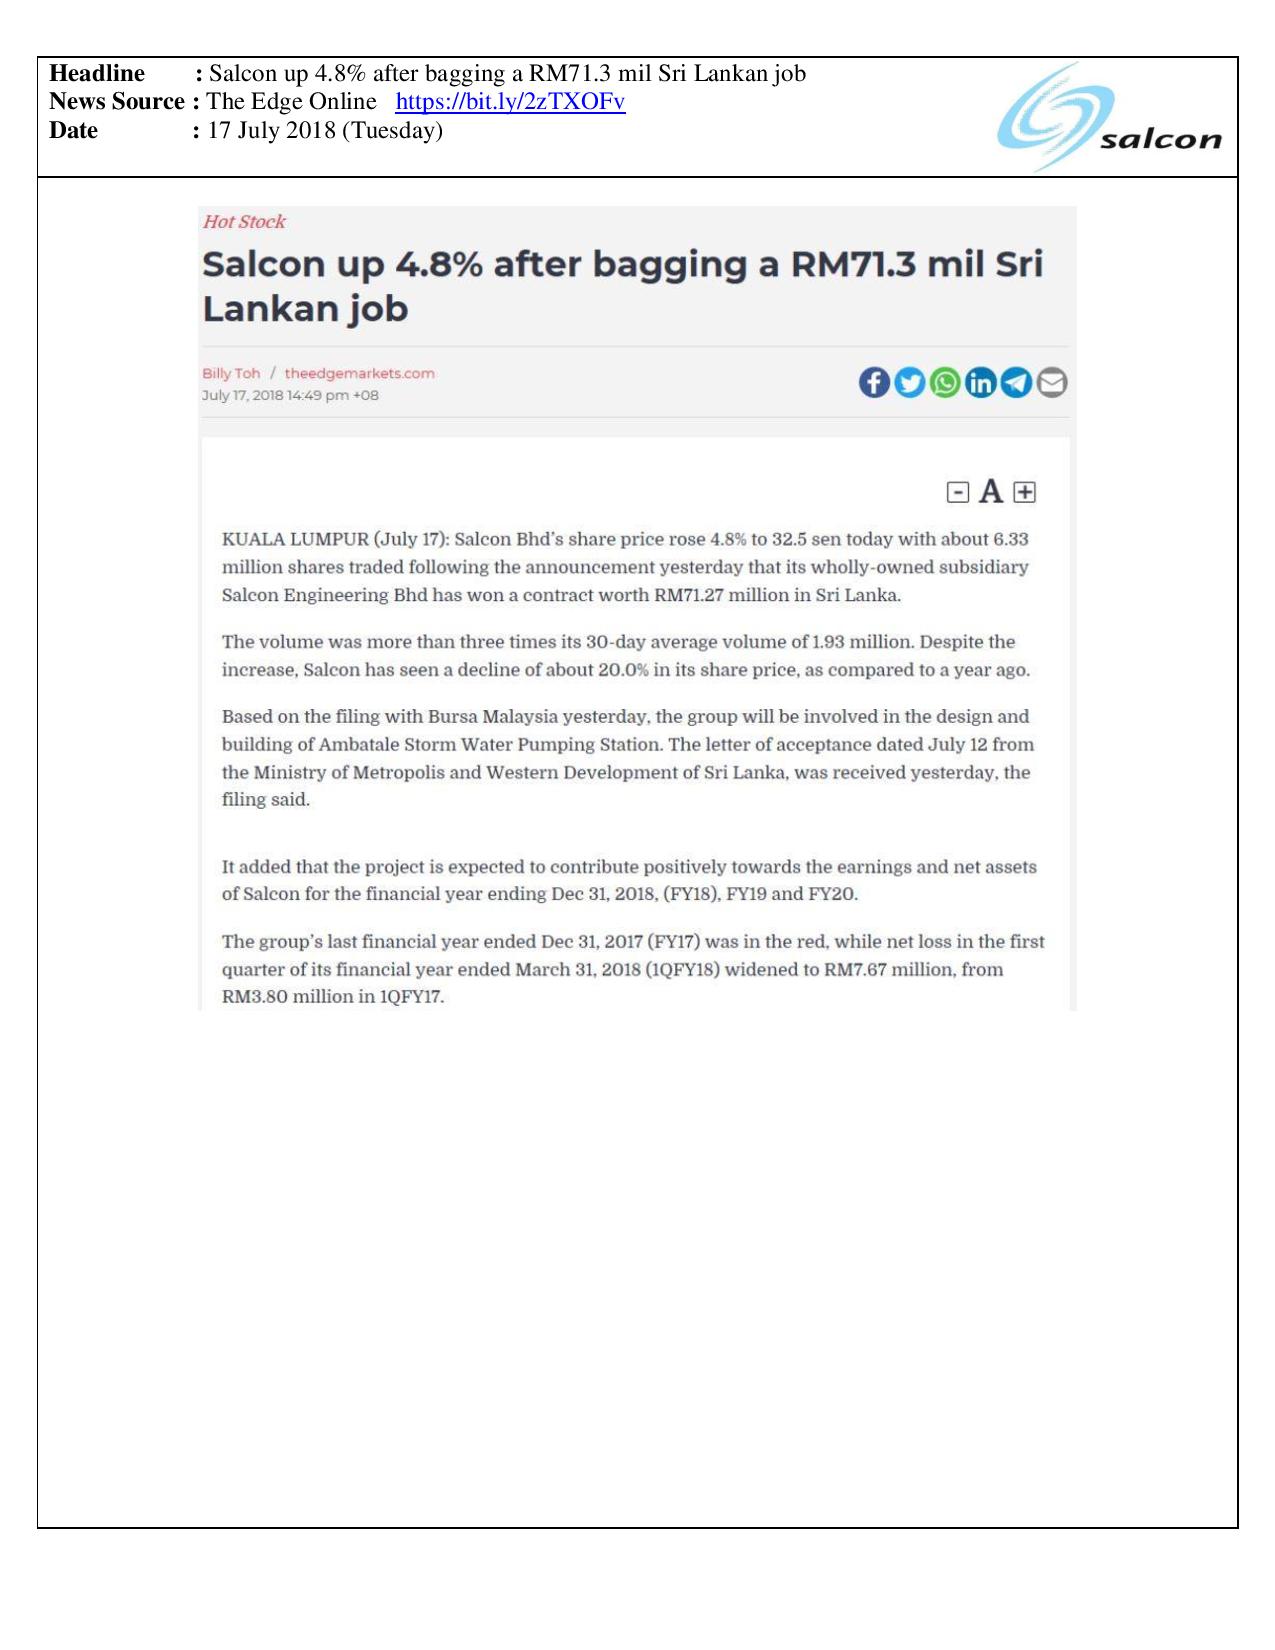 Salcon up 4.8% after bagging a RM71.3 mil Sri Lankan job	